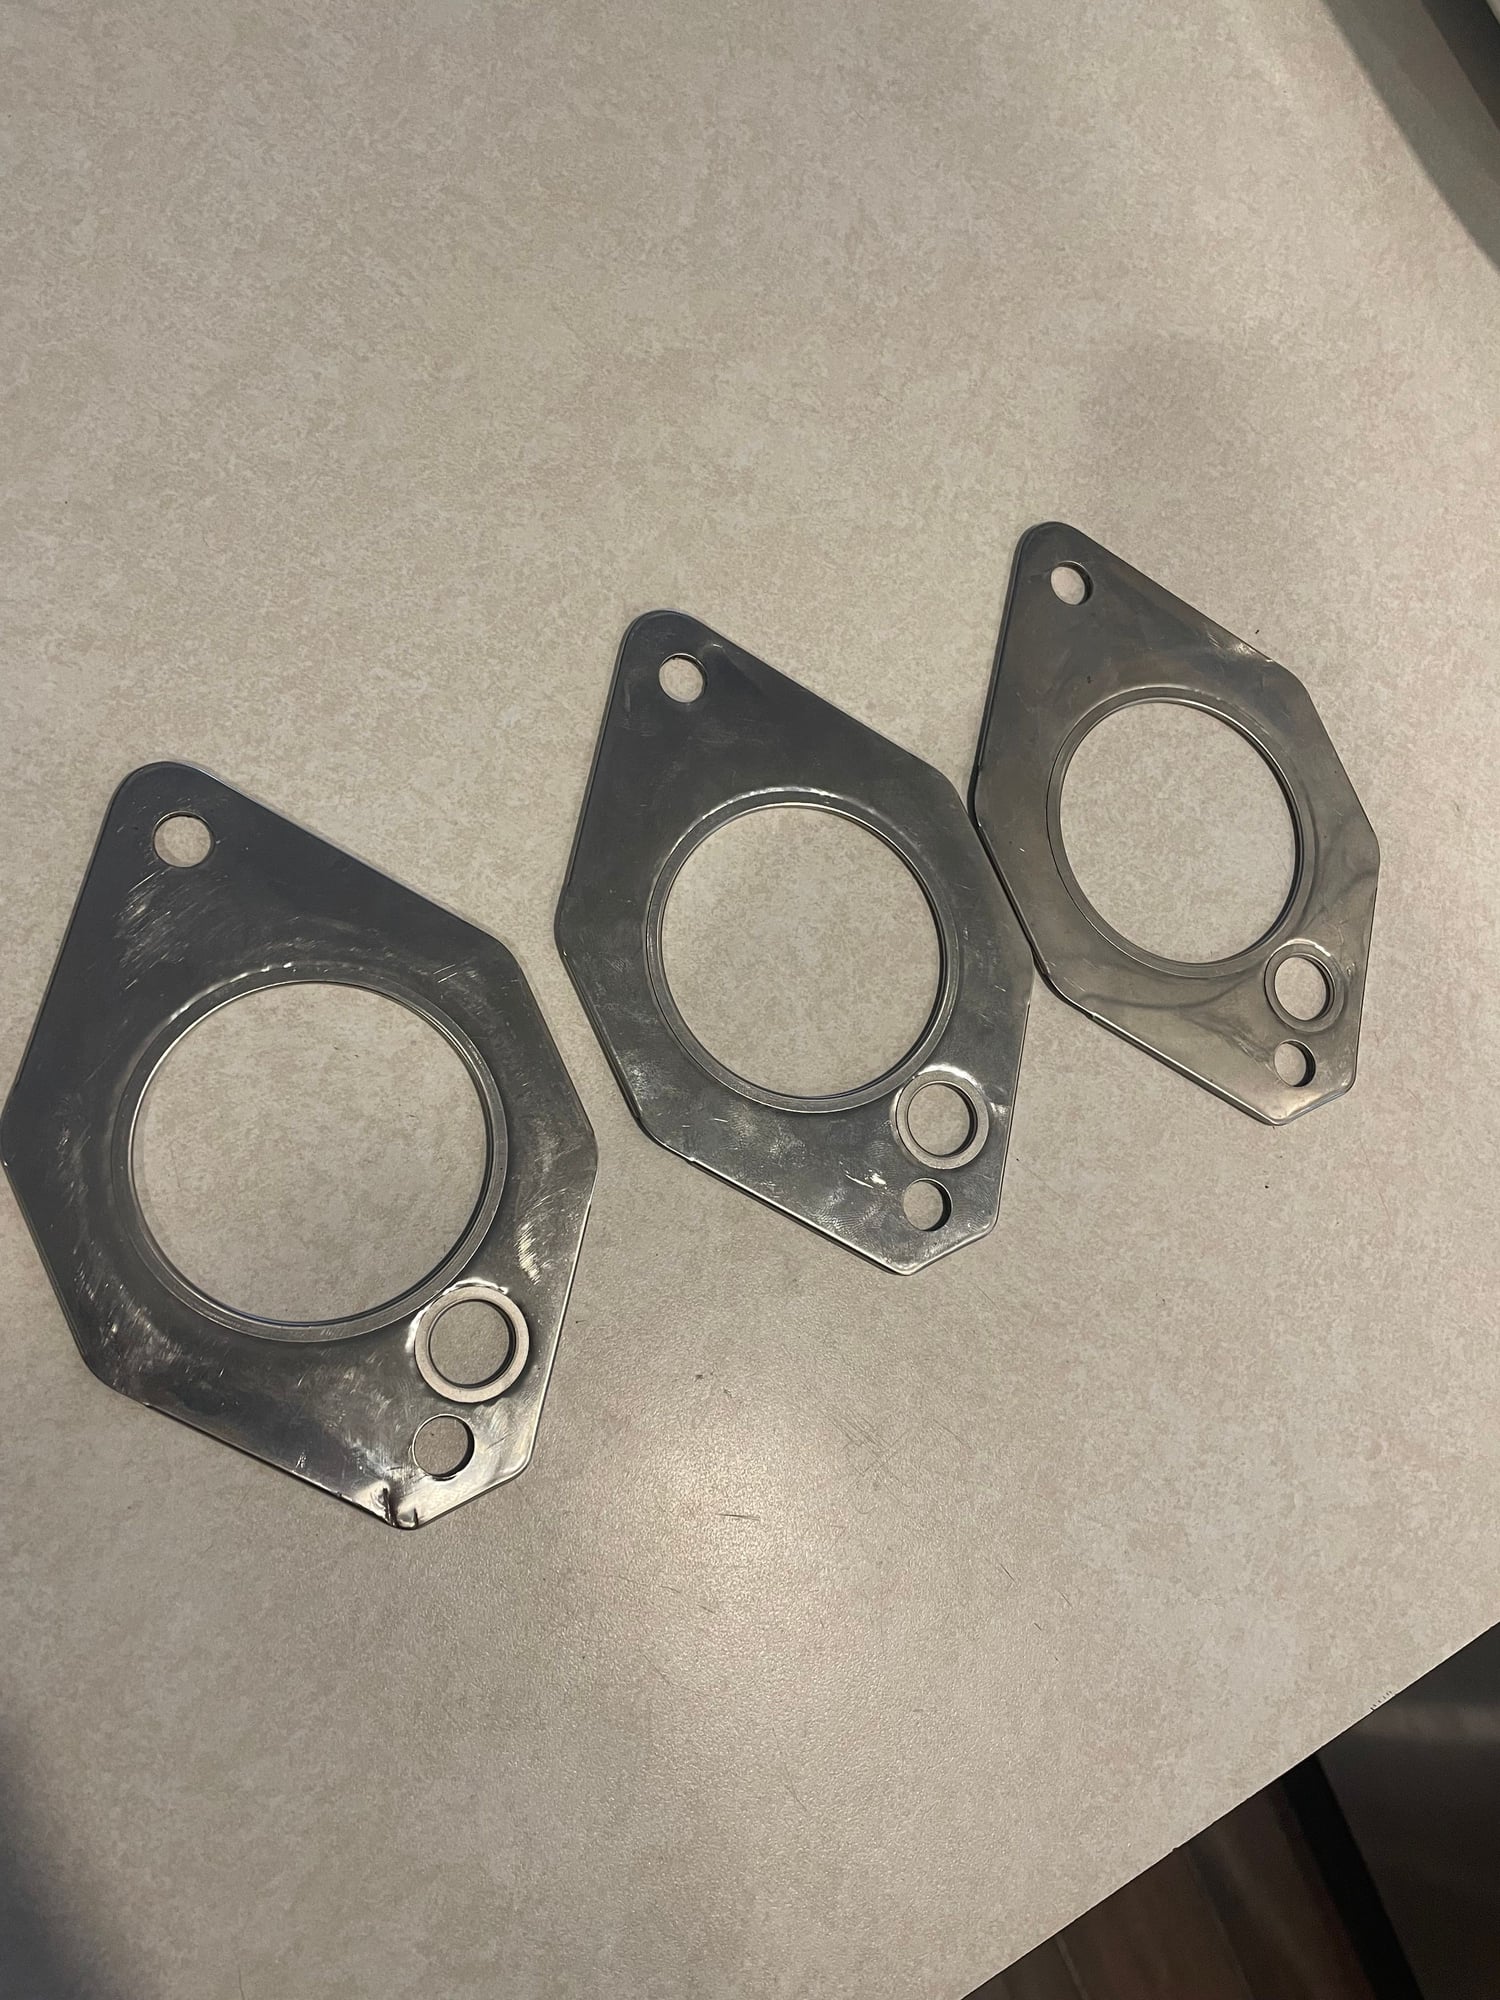 Engine - Exhaust - Exhaust Manifold Gaskets - New - 0  All Models - North Canton, OH 44720, United States